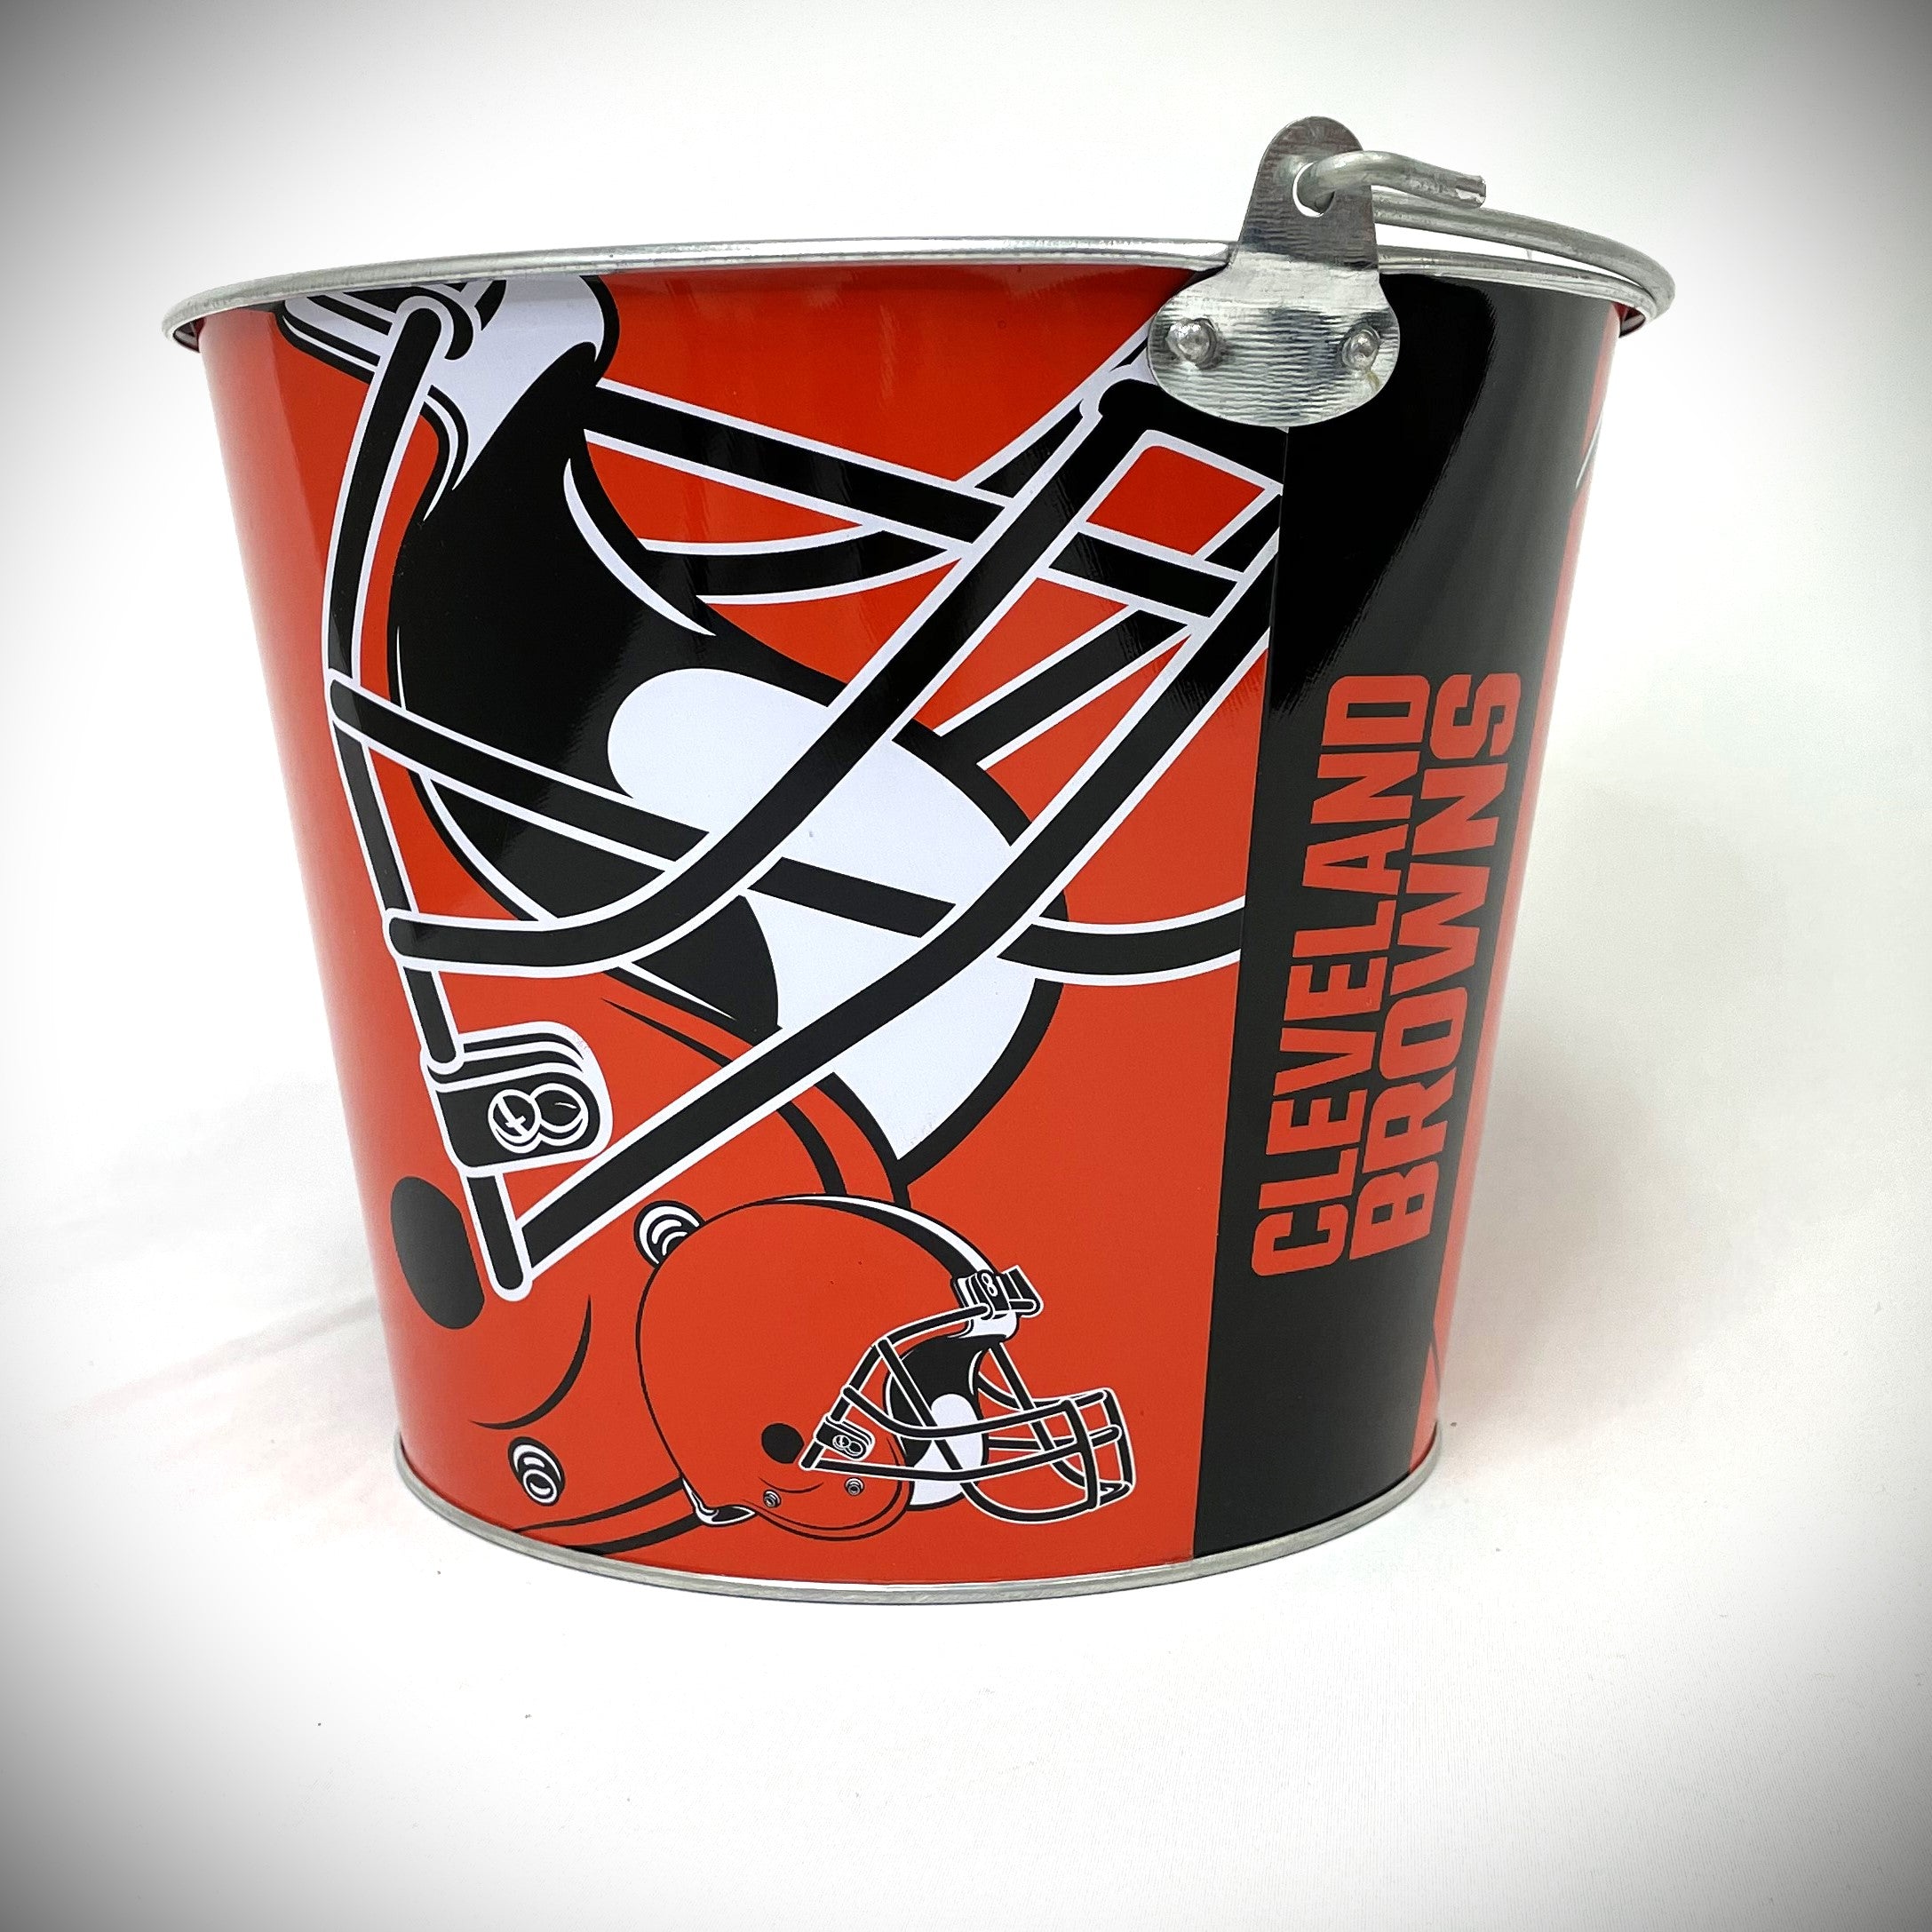 Cleveland Browns Gift Basket - Limited Quantities